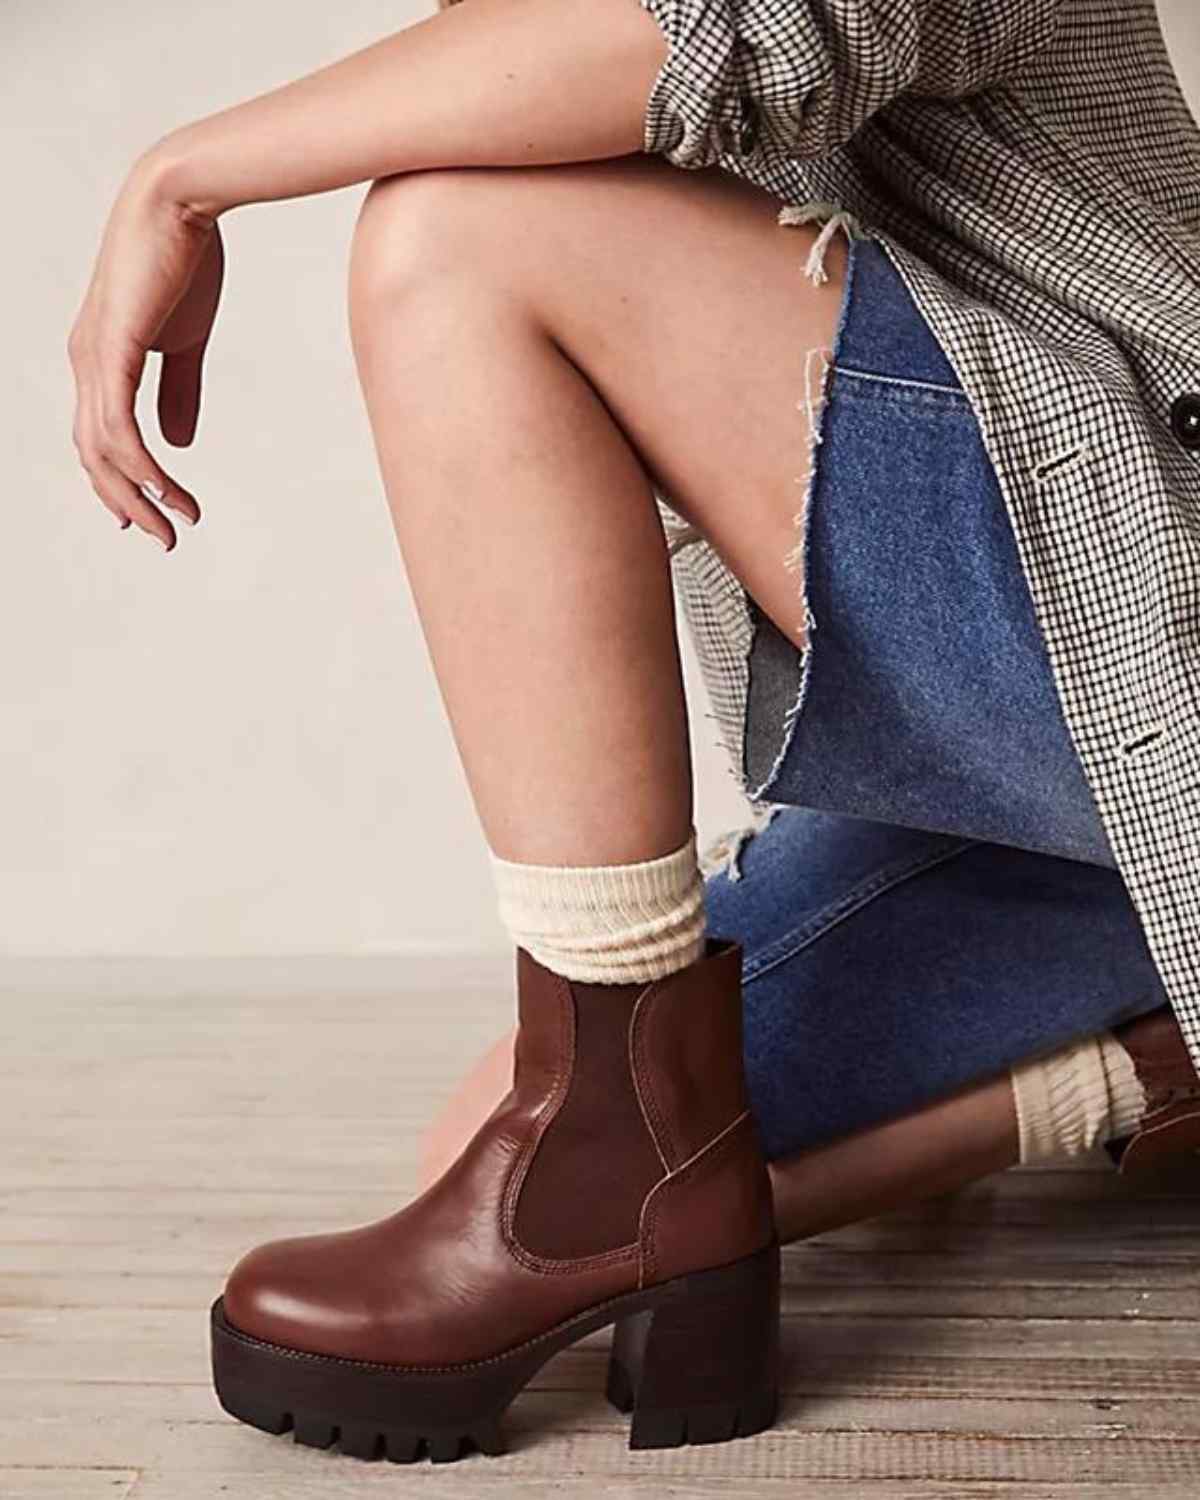 How to Wear Socks with Ankle Boots: 9 Best Socks for Ankle Boots